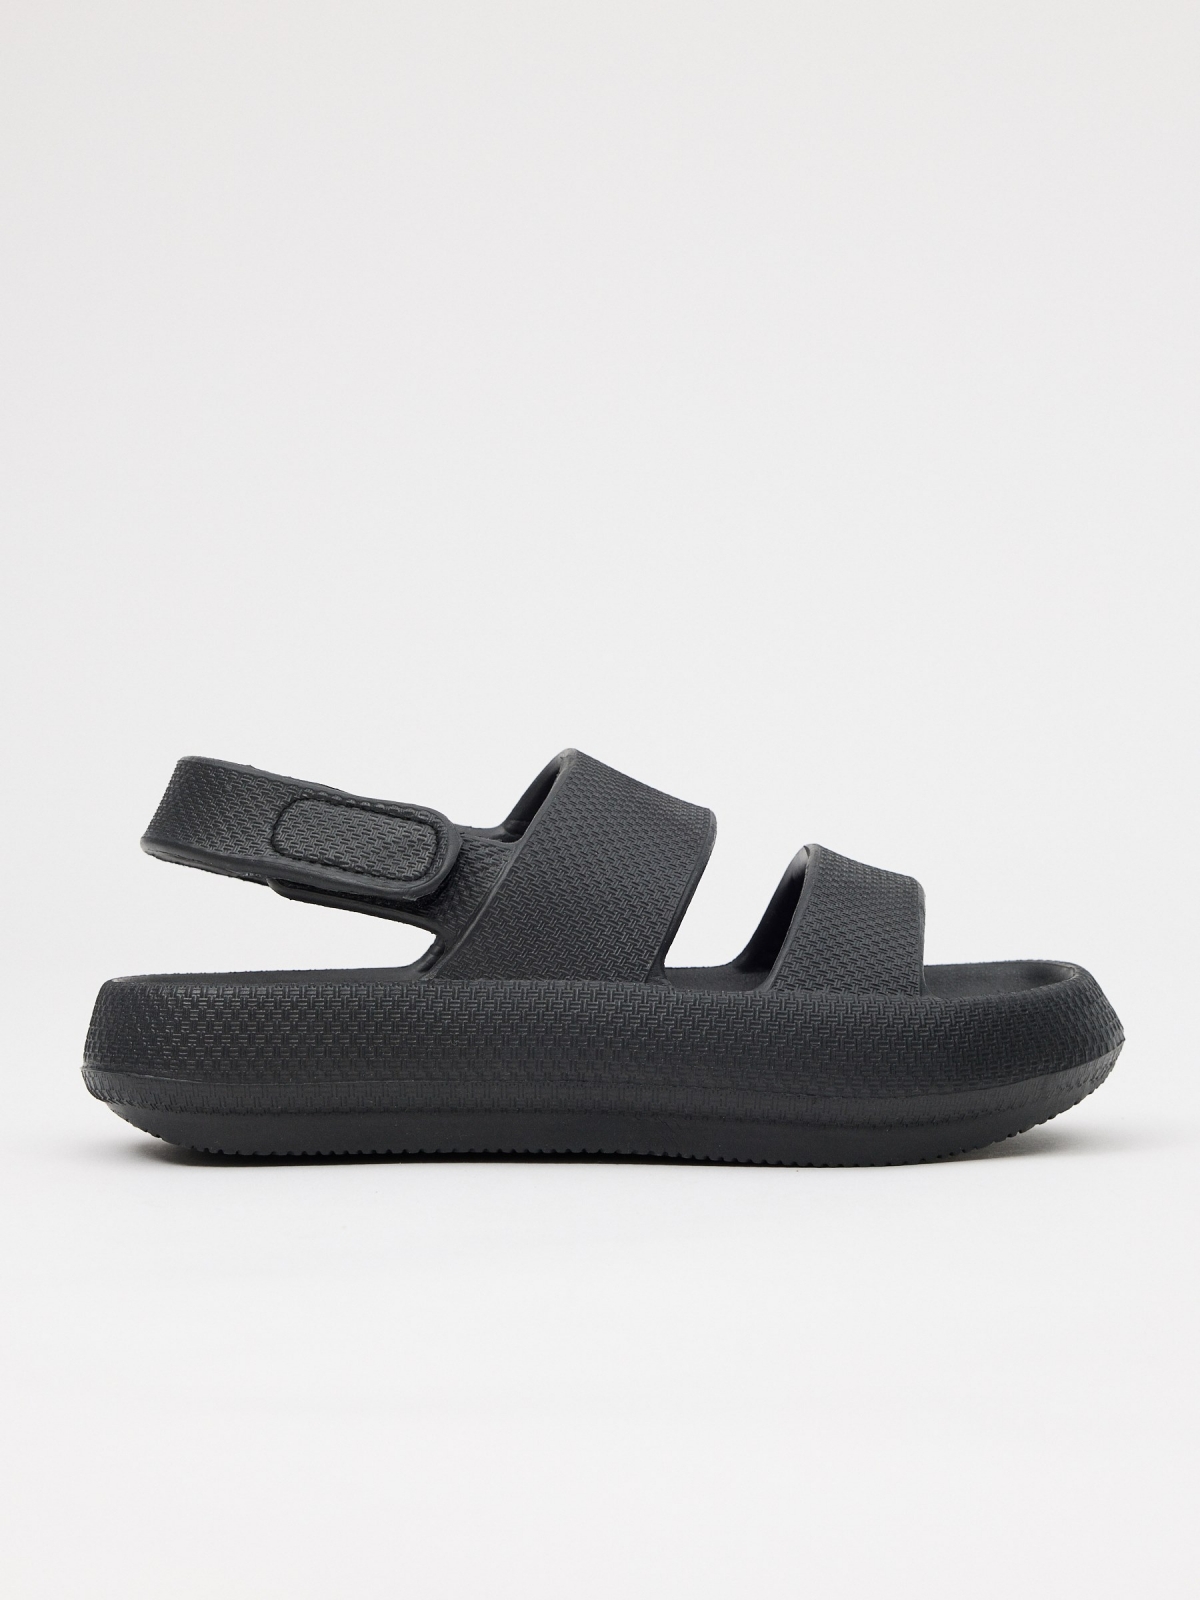 Flip flops with straps and platform black lateral view